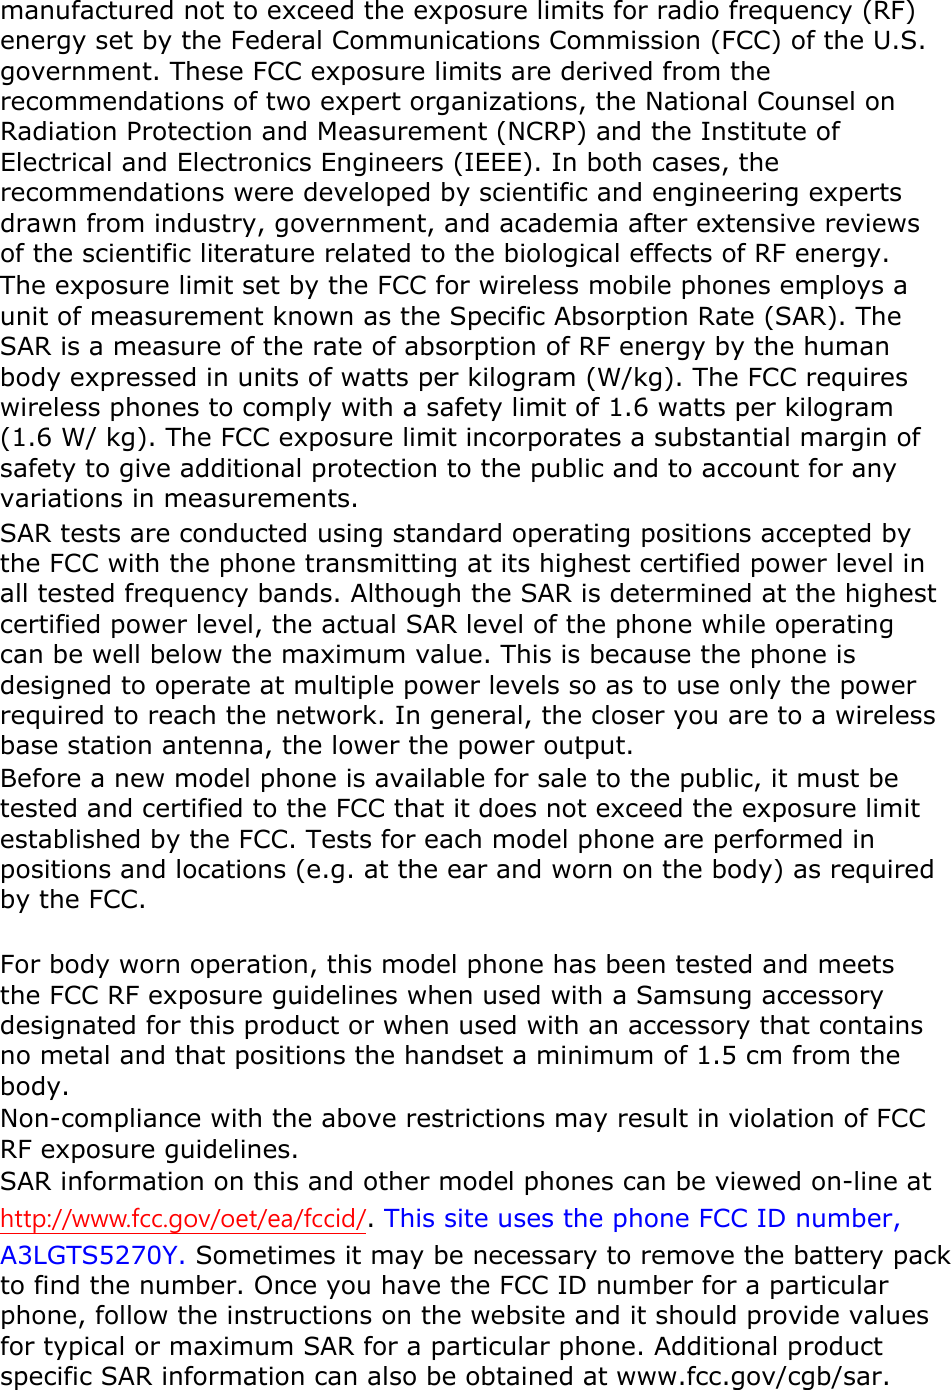 manufactured not to exceed the exposure limits for radio frequency (RF) energy set by the Federal Communications Commission (FCC) of the U.S. government. These FCC exposure limits are derived from the recommendations of two expert organizations, the National Counsel on Radiation Protection and Measurement (NCRP) and the Institute of Electrical and Electronics Engineers (IEEE). In both cases, the recommendations were developed by scientific and engineering experts drawn from industry, government, and academia after extensive reviews of the scientific literature related to the biological effects of RF energy. The exposure limit set by the FCC for wireless mobile phones employs a unit of measurement known as the Specific Absorption Rate (SAR). The SAR is a measure of the rate of absorption of RF energy by the human body expressed in units of watts per kilogram (W/kg). The FCC requires wireless phones to comply with a safety limit of 1.6 watts per kilogram (1.6 W/ kg). The FCC exposure limit incorporates a substantial margin of safety to give additional protection to the public and to account for any variations in measurements. SAR tests are conducted using standard operating positions accepted by the FCC with the phone transmitting at its highest certified power level in all tested frequency bands. Although the SAR is determined at the highest certified power level, the actual SAR level of the phone while operating can be well below the maximum value. This is because the phone is designed to operate at multiple power levels so as to use only the power required to reach the network. In general, the closer you are to a wireless base station antenna, the lower the power output. Before a new model phone is available for sale to the public, it must be tested and certified to the FCC that it does not exceed the exposure limit established by the FCC. Tests for each model phone are performed in positions and locations (e.g. at the ear and worn on the body) as required by the FCC.      For body worn operation, this model phone has been tested and meets the FCC RF exposure guidelines when used with a Samsung accessory designated for this product or when used with an accessory that contains no metal and that positions the handset a minimum of 1.5 cm from the body.  Non-compliance with the above restrictions may result in violation of FCC RF exposure guidelines. SAR information on this and other model phones can be viewed on-line at http://www.fcc.gov/oet/ea/fccid/. This site uses the phone FCC ID number, A3LGTS5270Y. Sometimes it may be necessary to remove the battery pack to find the number. Once you have the FCC ID number for a particular phone, follow the instructions on the website and it should provide values for typical or maximum SAR for a particular phone. Additional product specific SAR information can also be obtained at www.fcc.gov/cgb/sar. 